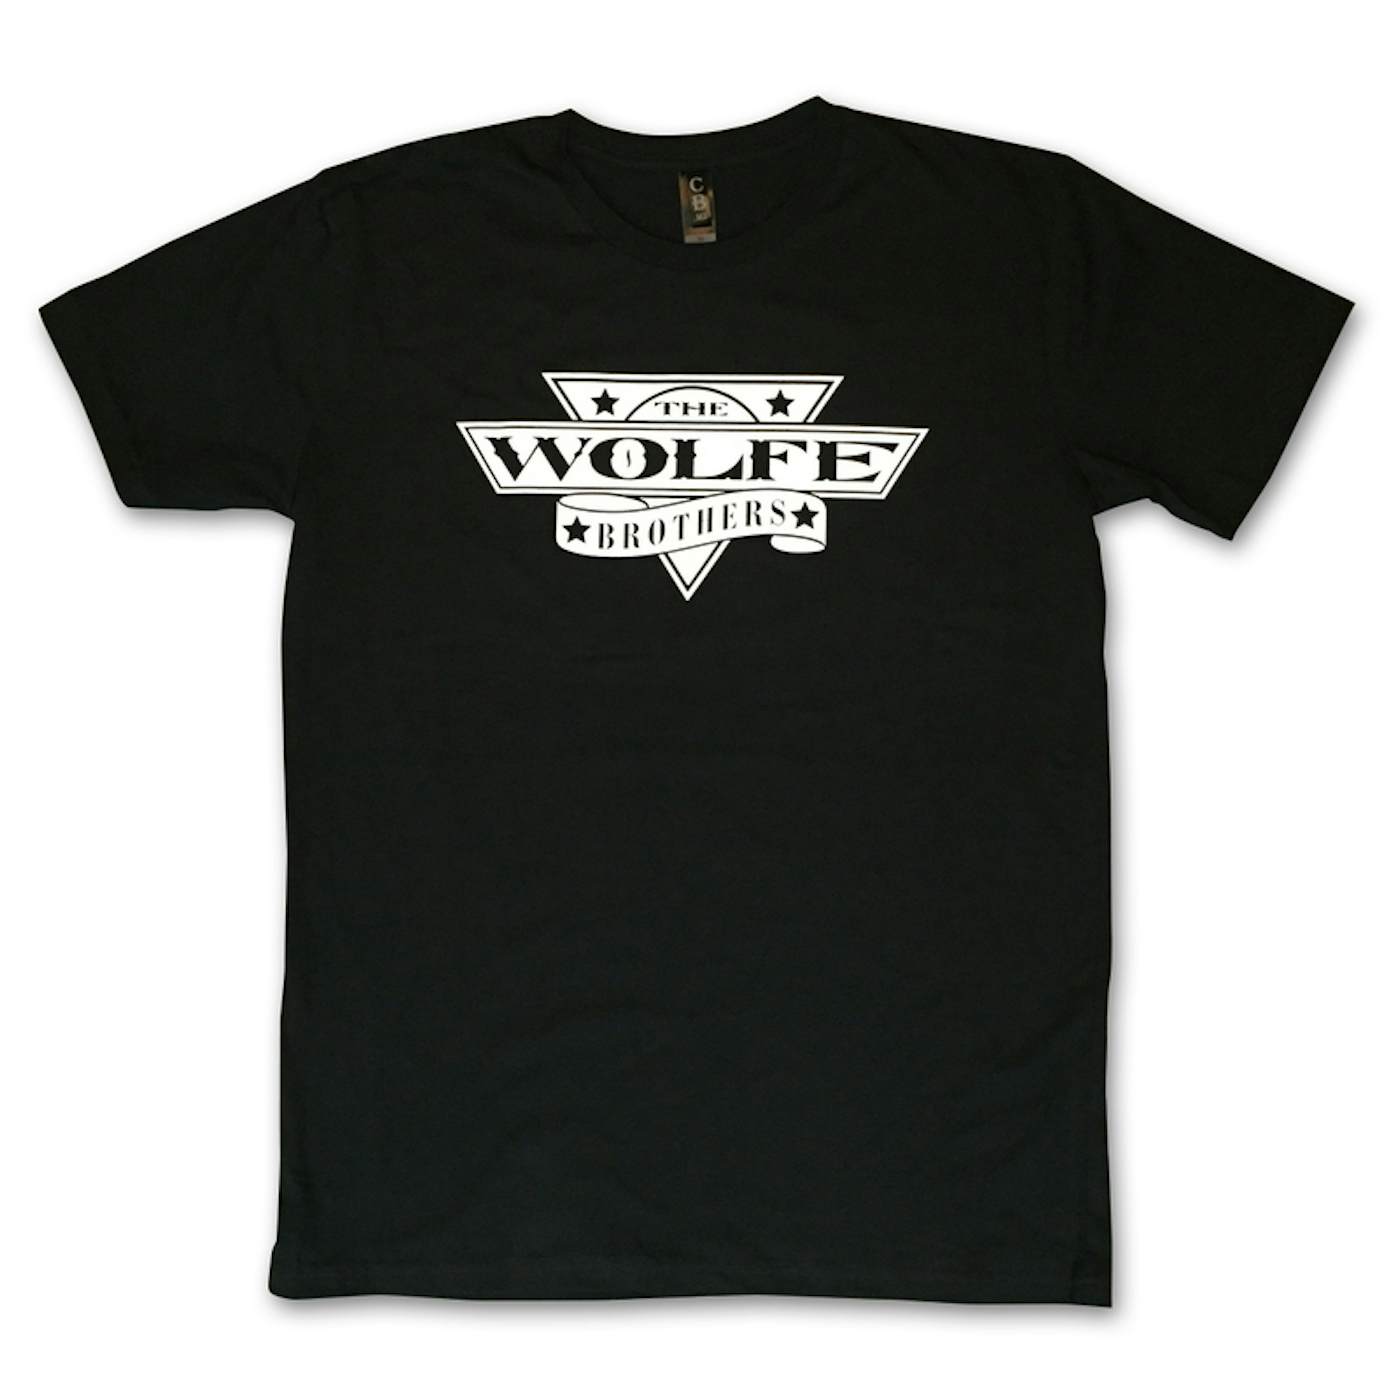 The Wolfe Brothers - Black Tee